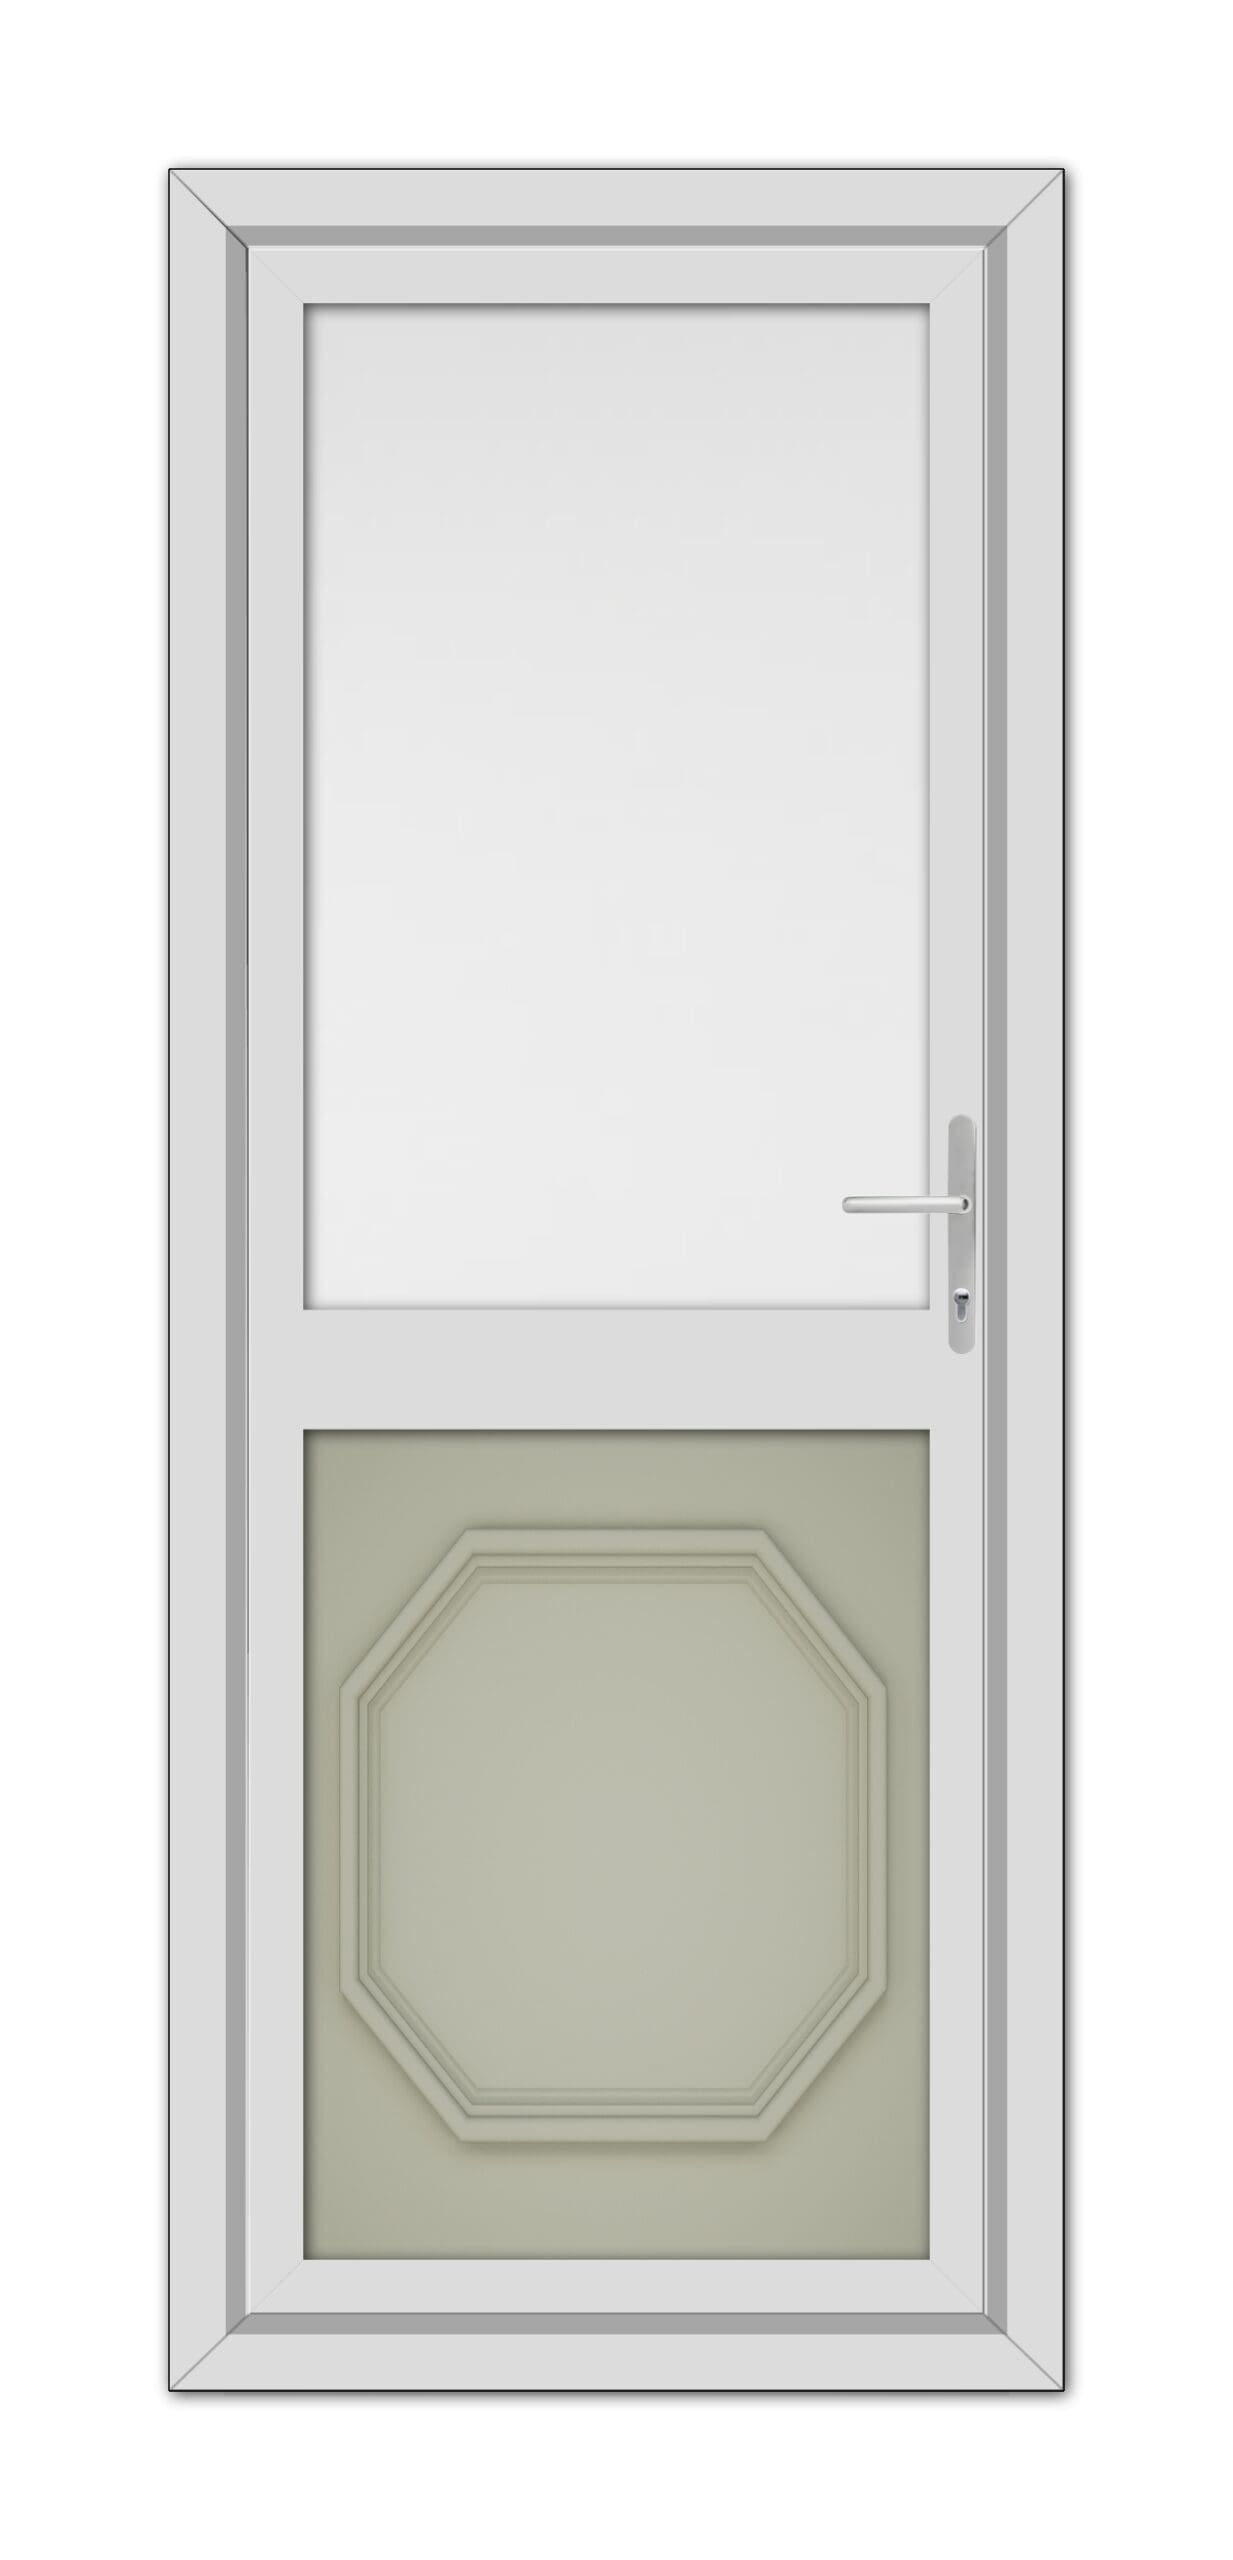 A modern Agate Grey Buckingham Half uPVC Back Door with an octagonal window at the bottom and a square window at the top, featuring a metallic handle on the right side.